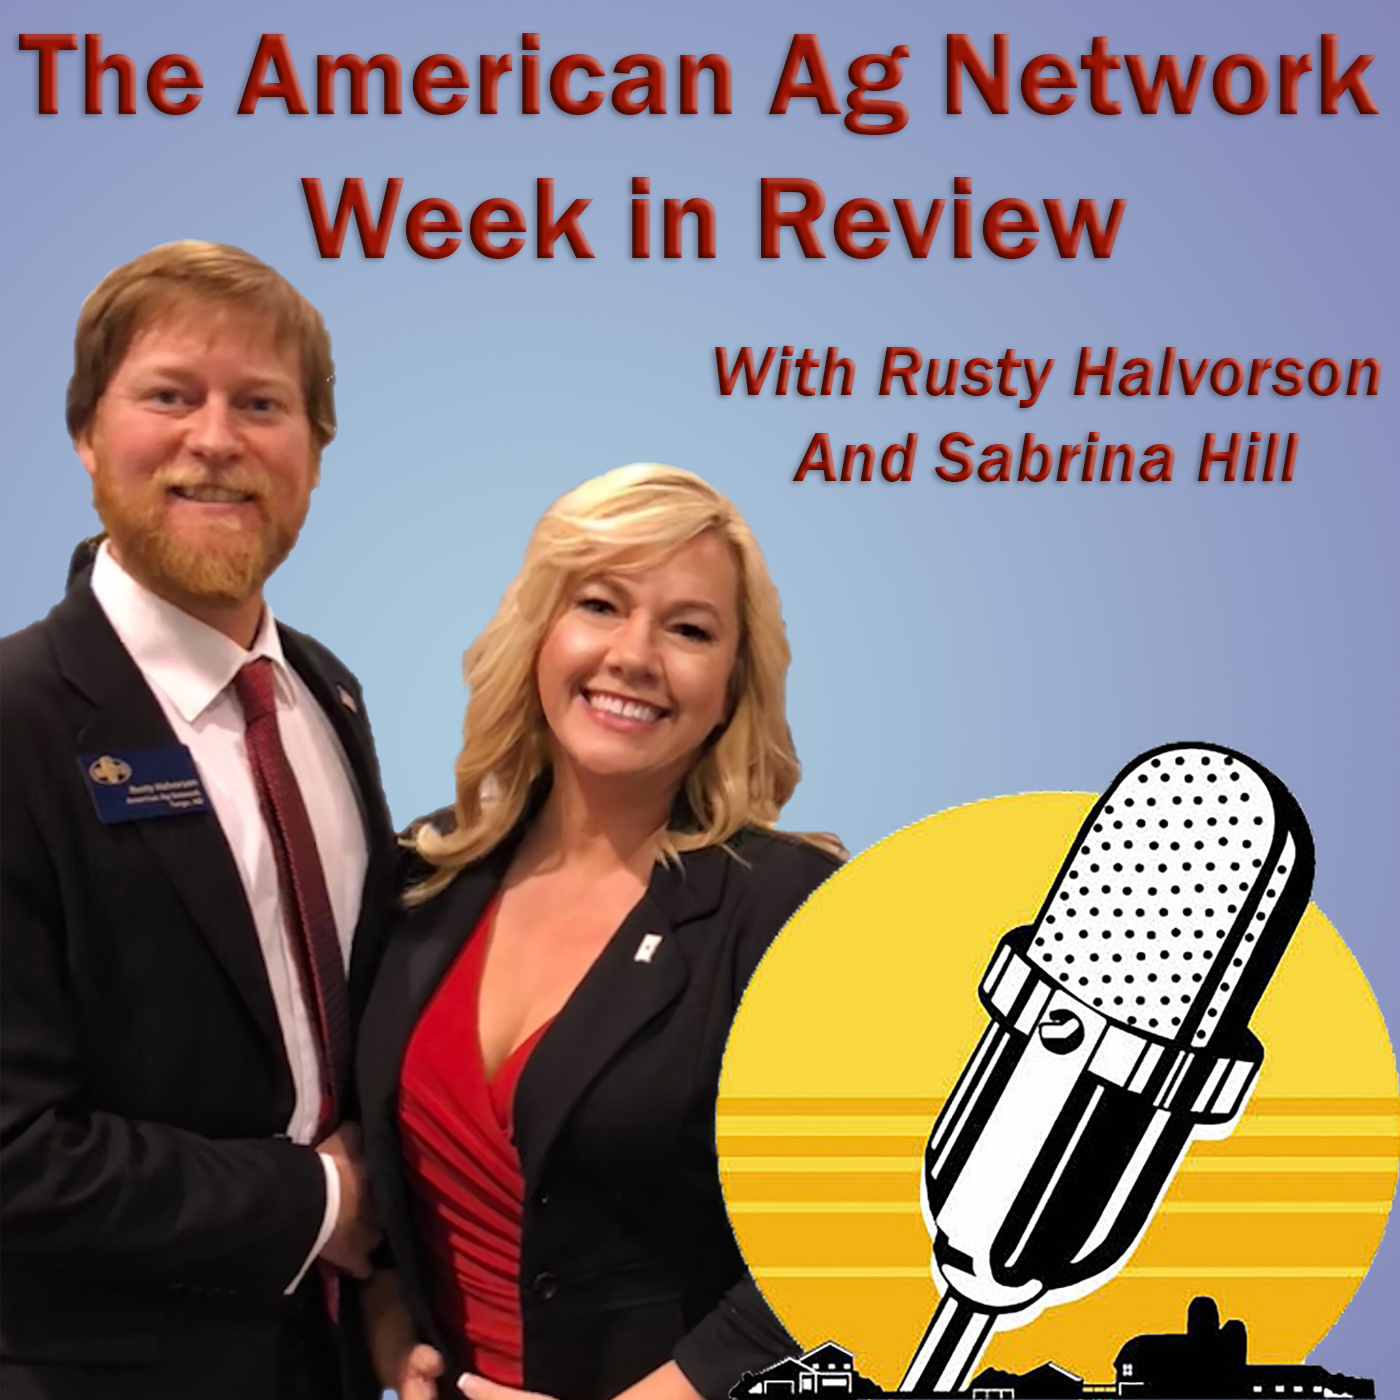 New Trade Developments, Progress on the Farm Bill, and National Dairy Month - American Ag Network June 2, 2018